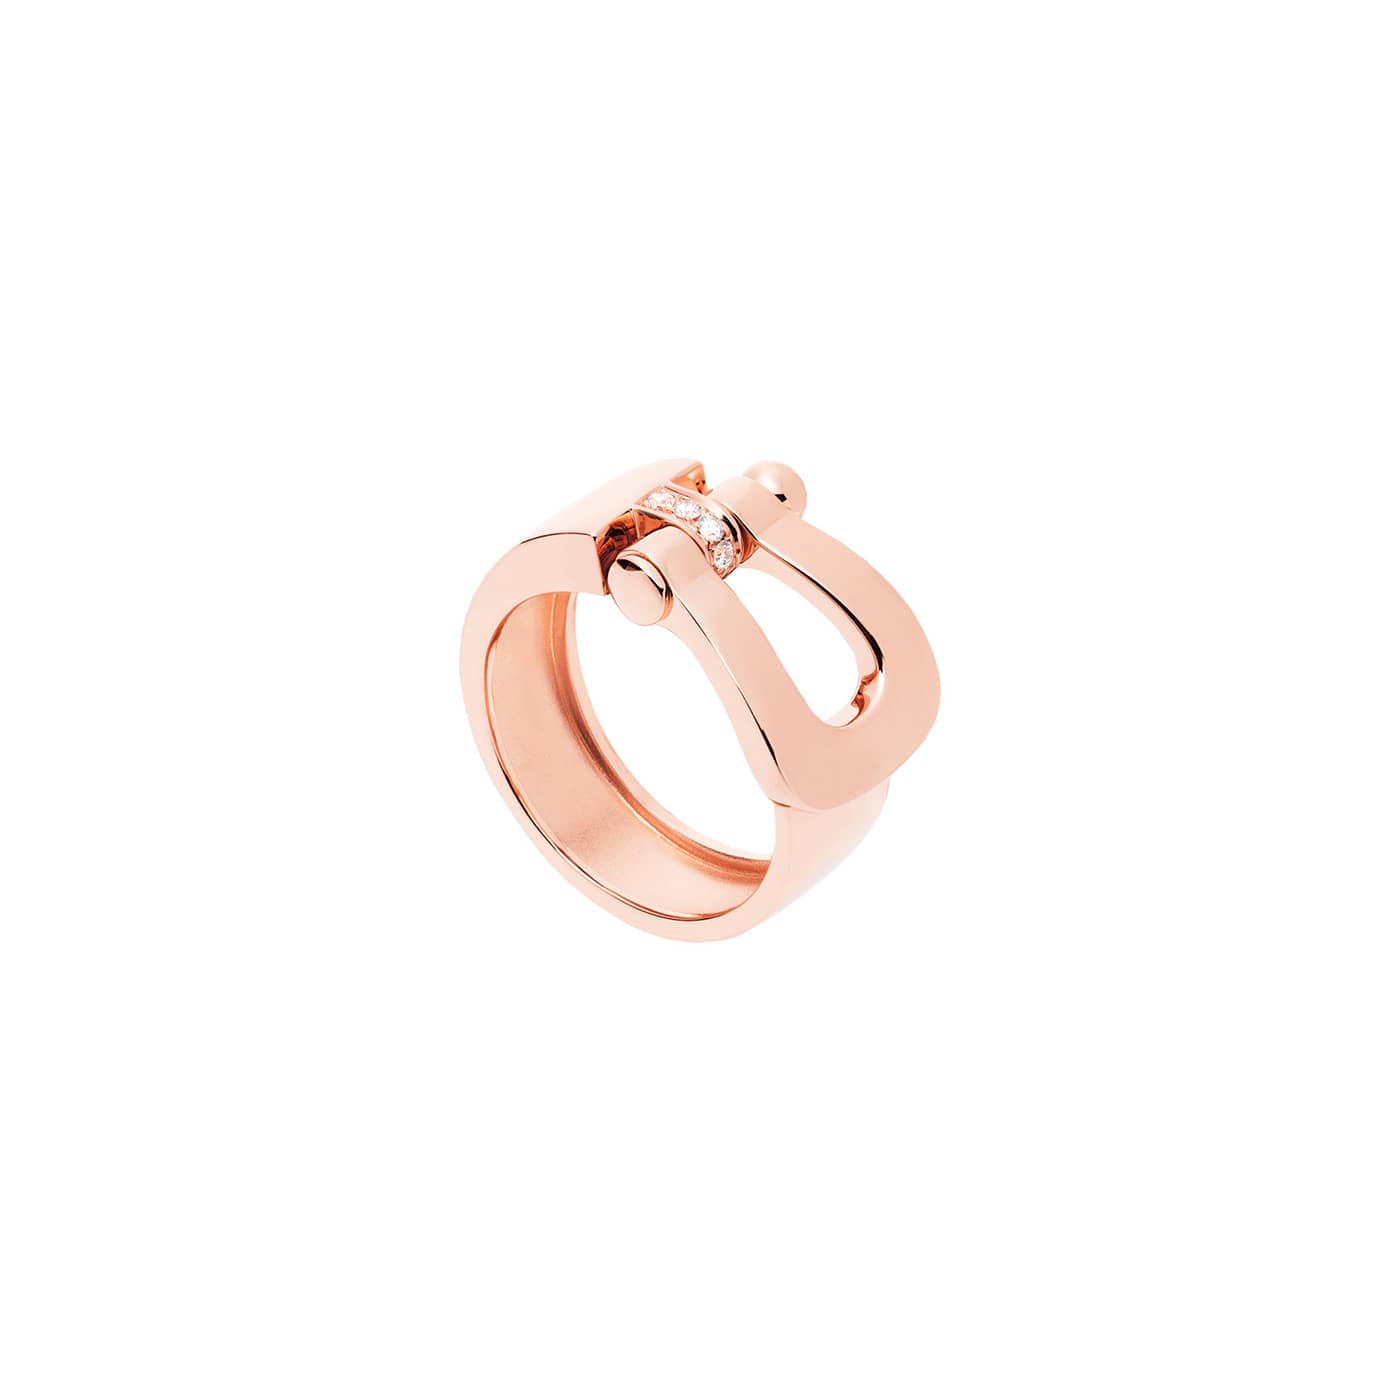 Bague Force 10 GM or rose et diamants Fred